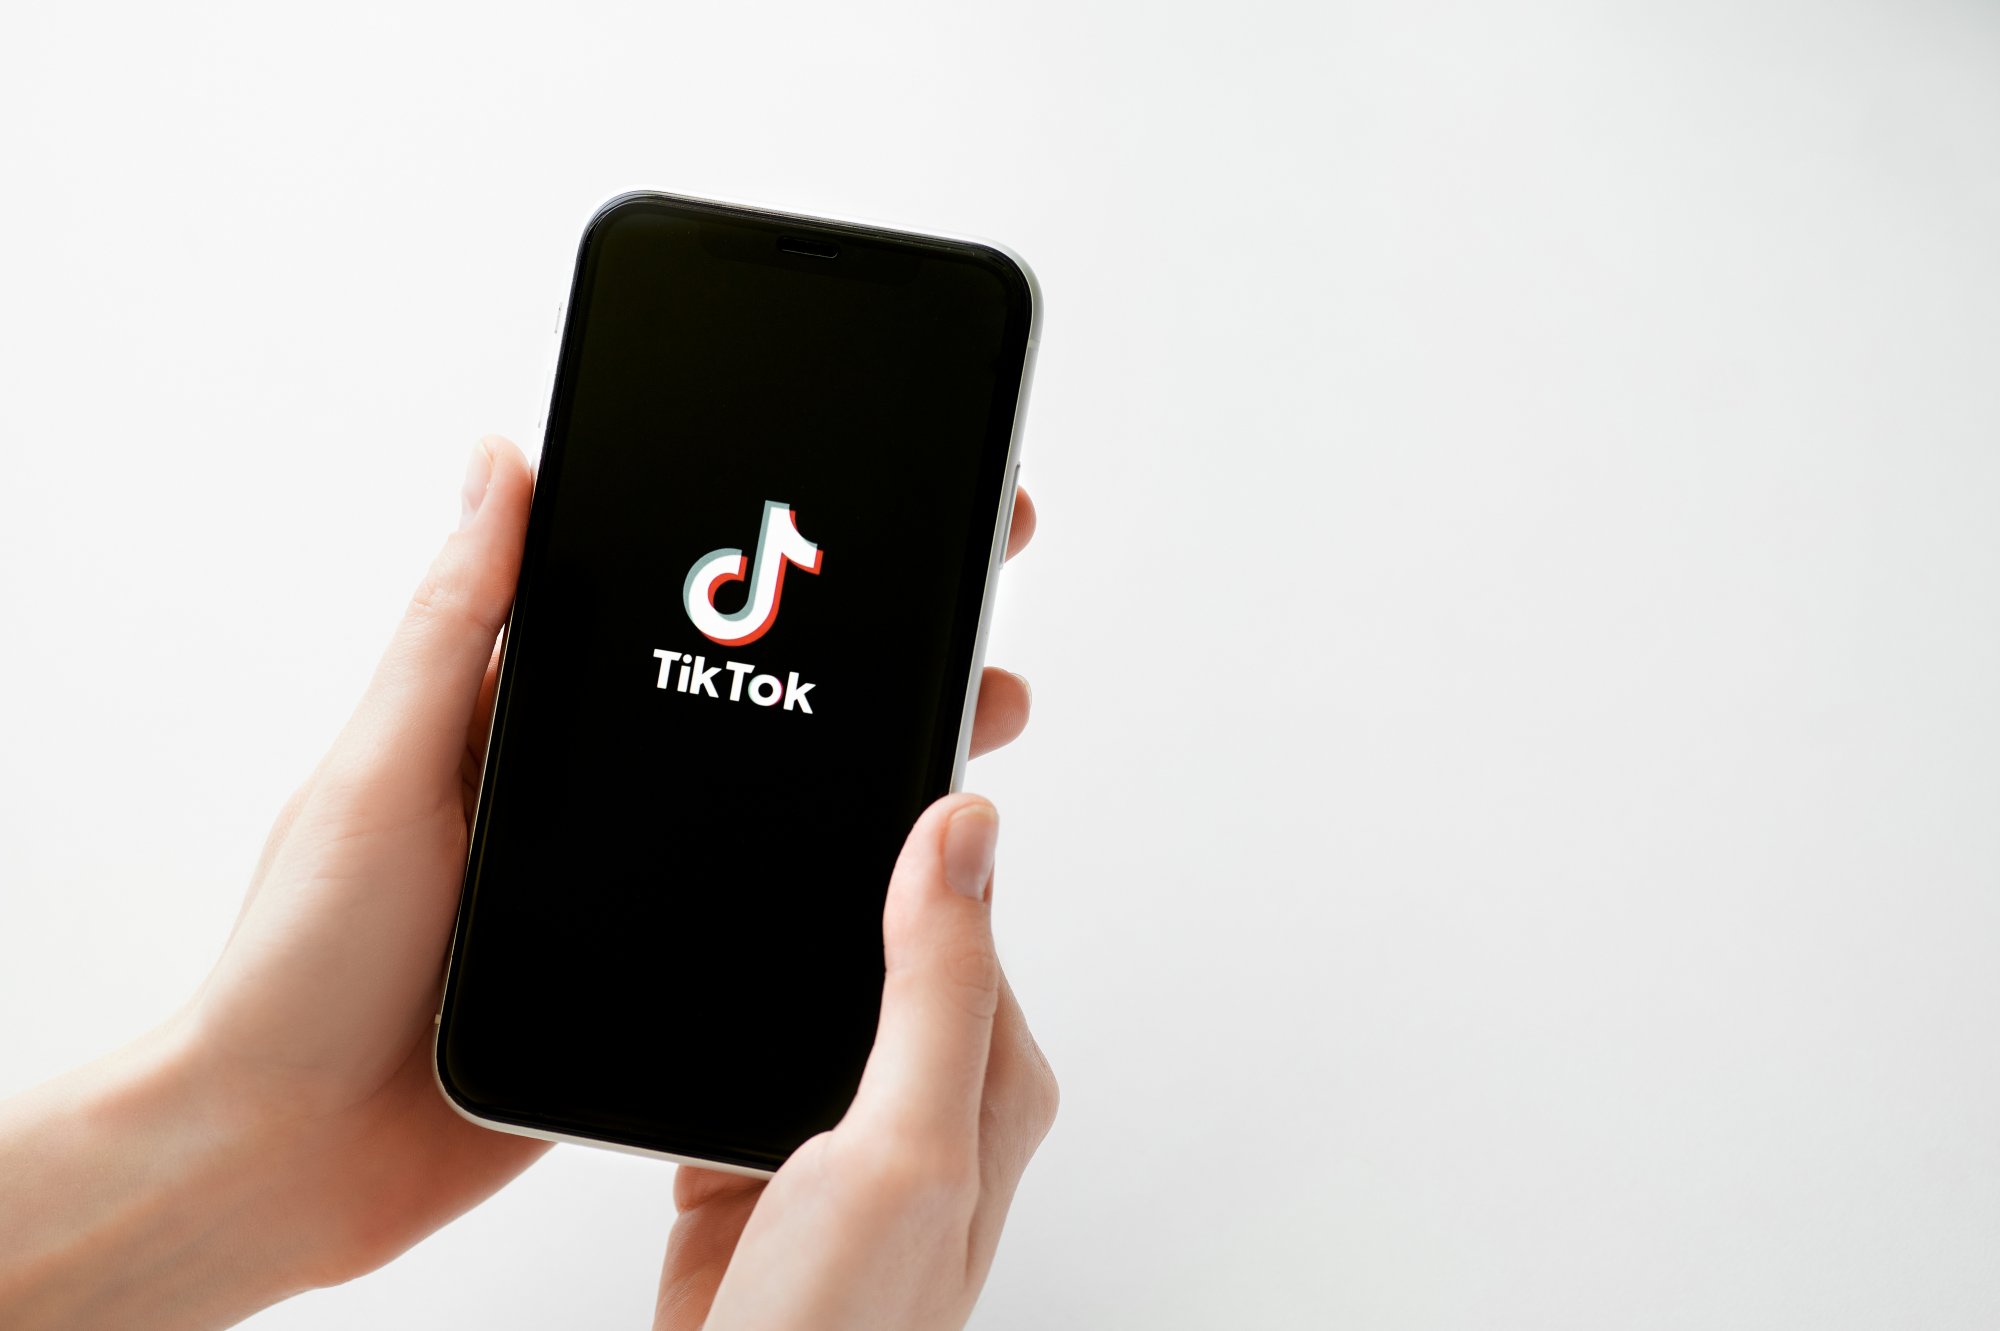 TikTok: “The algorithm does not favor Palestinians, and our teenage users support Palestine”